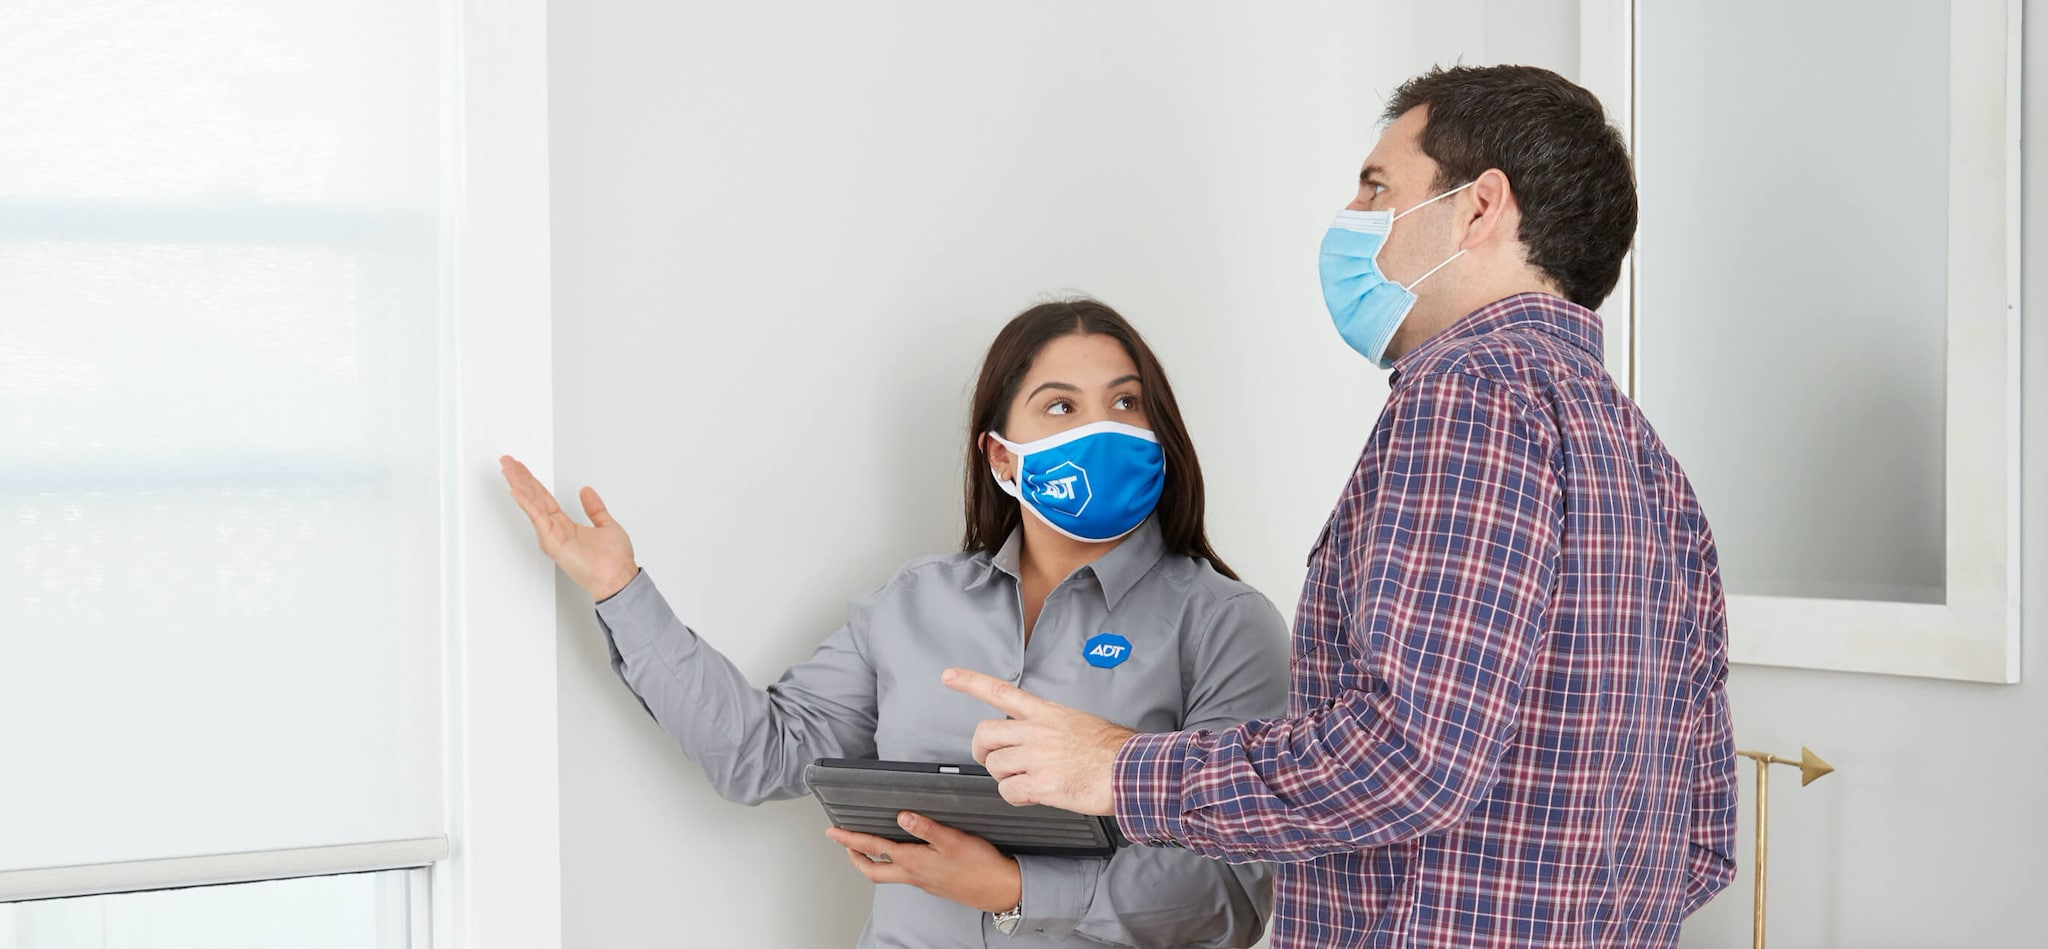 ADT sales agent with customer wearing face masks